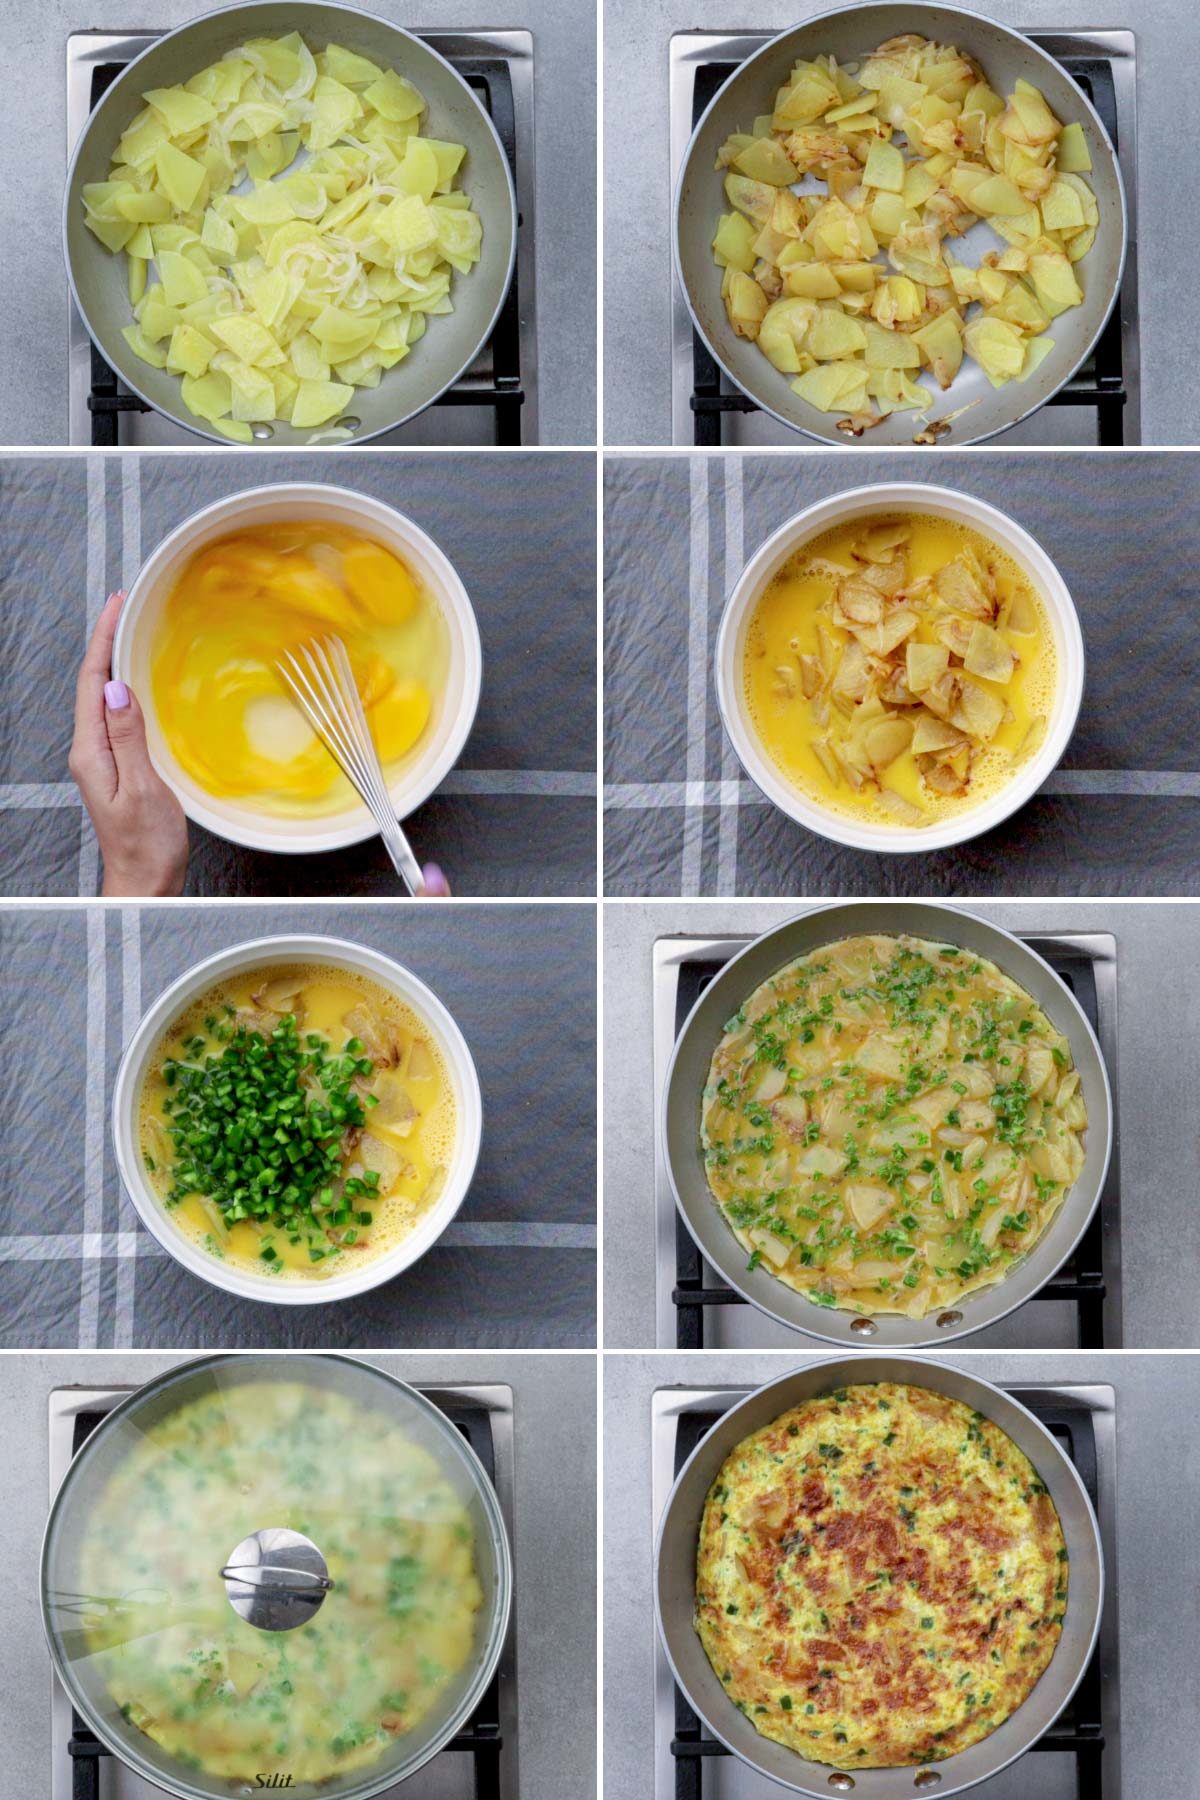 Steps on how to cook Potato Frittata.